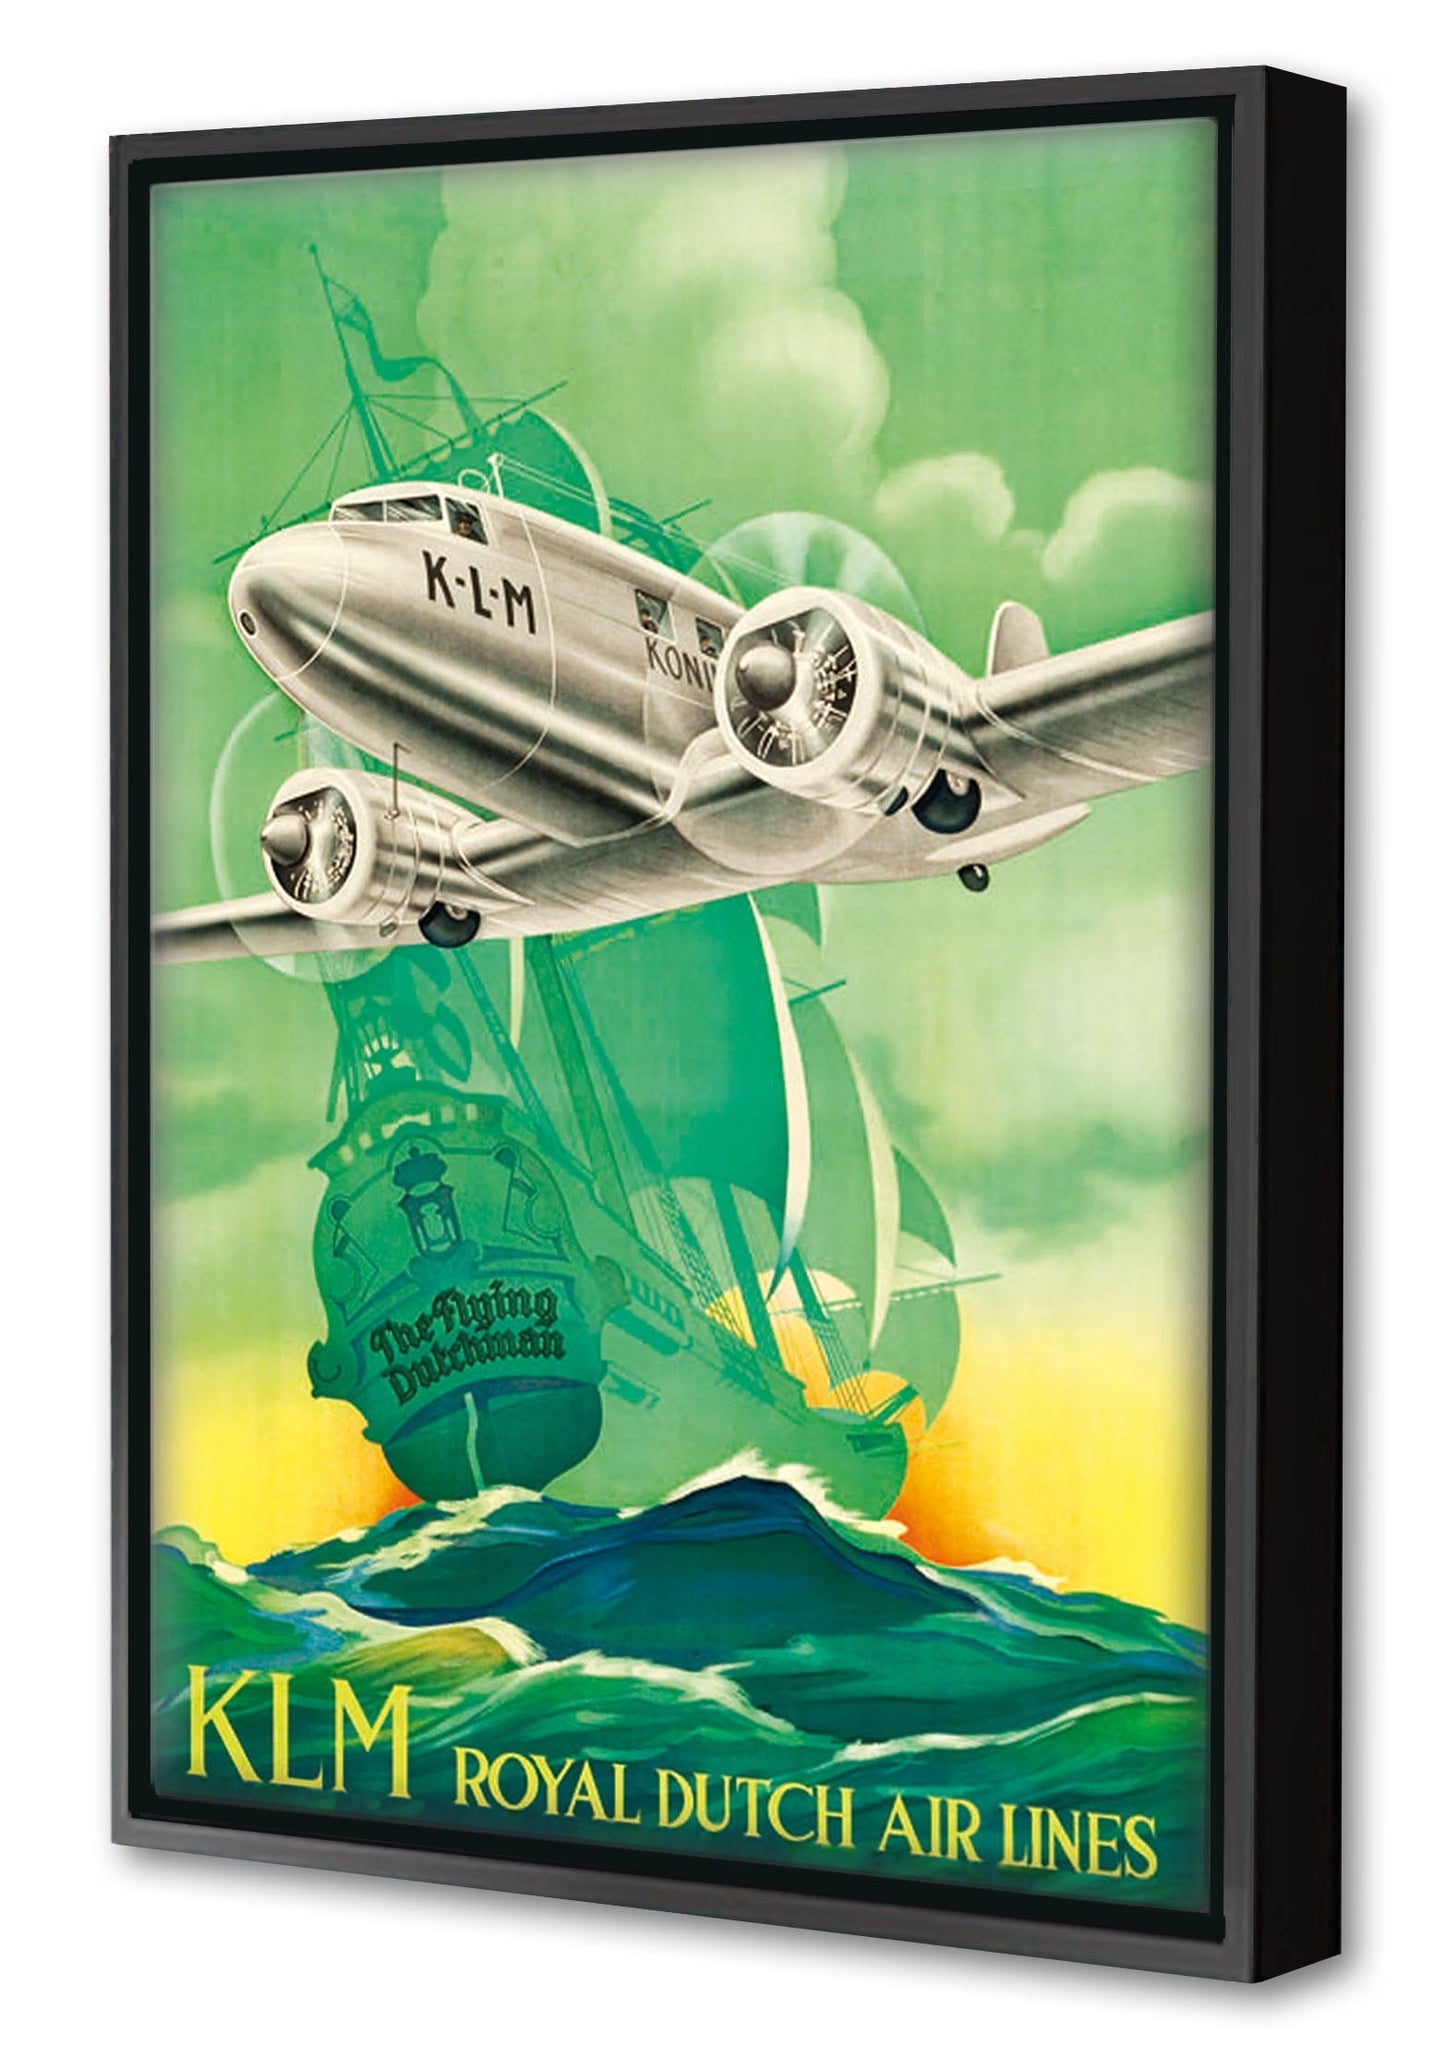 KLM Royal Dutch Air Lines-airlines, print-Canvas Print with Box Frame-40 x 60 cm-BLUE SHAKER